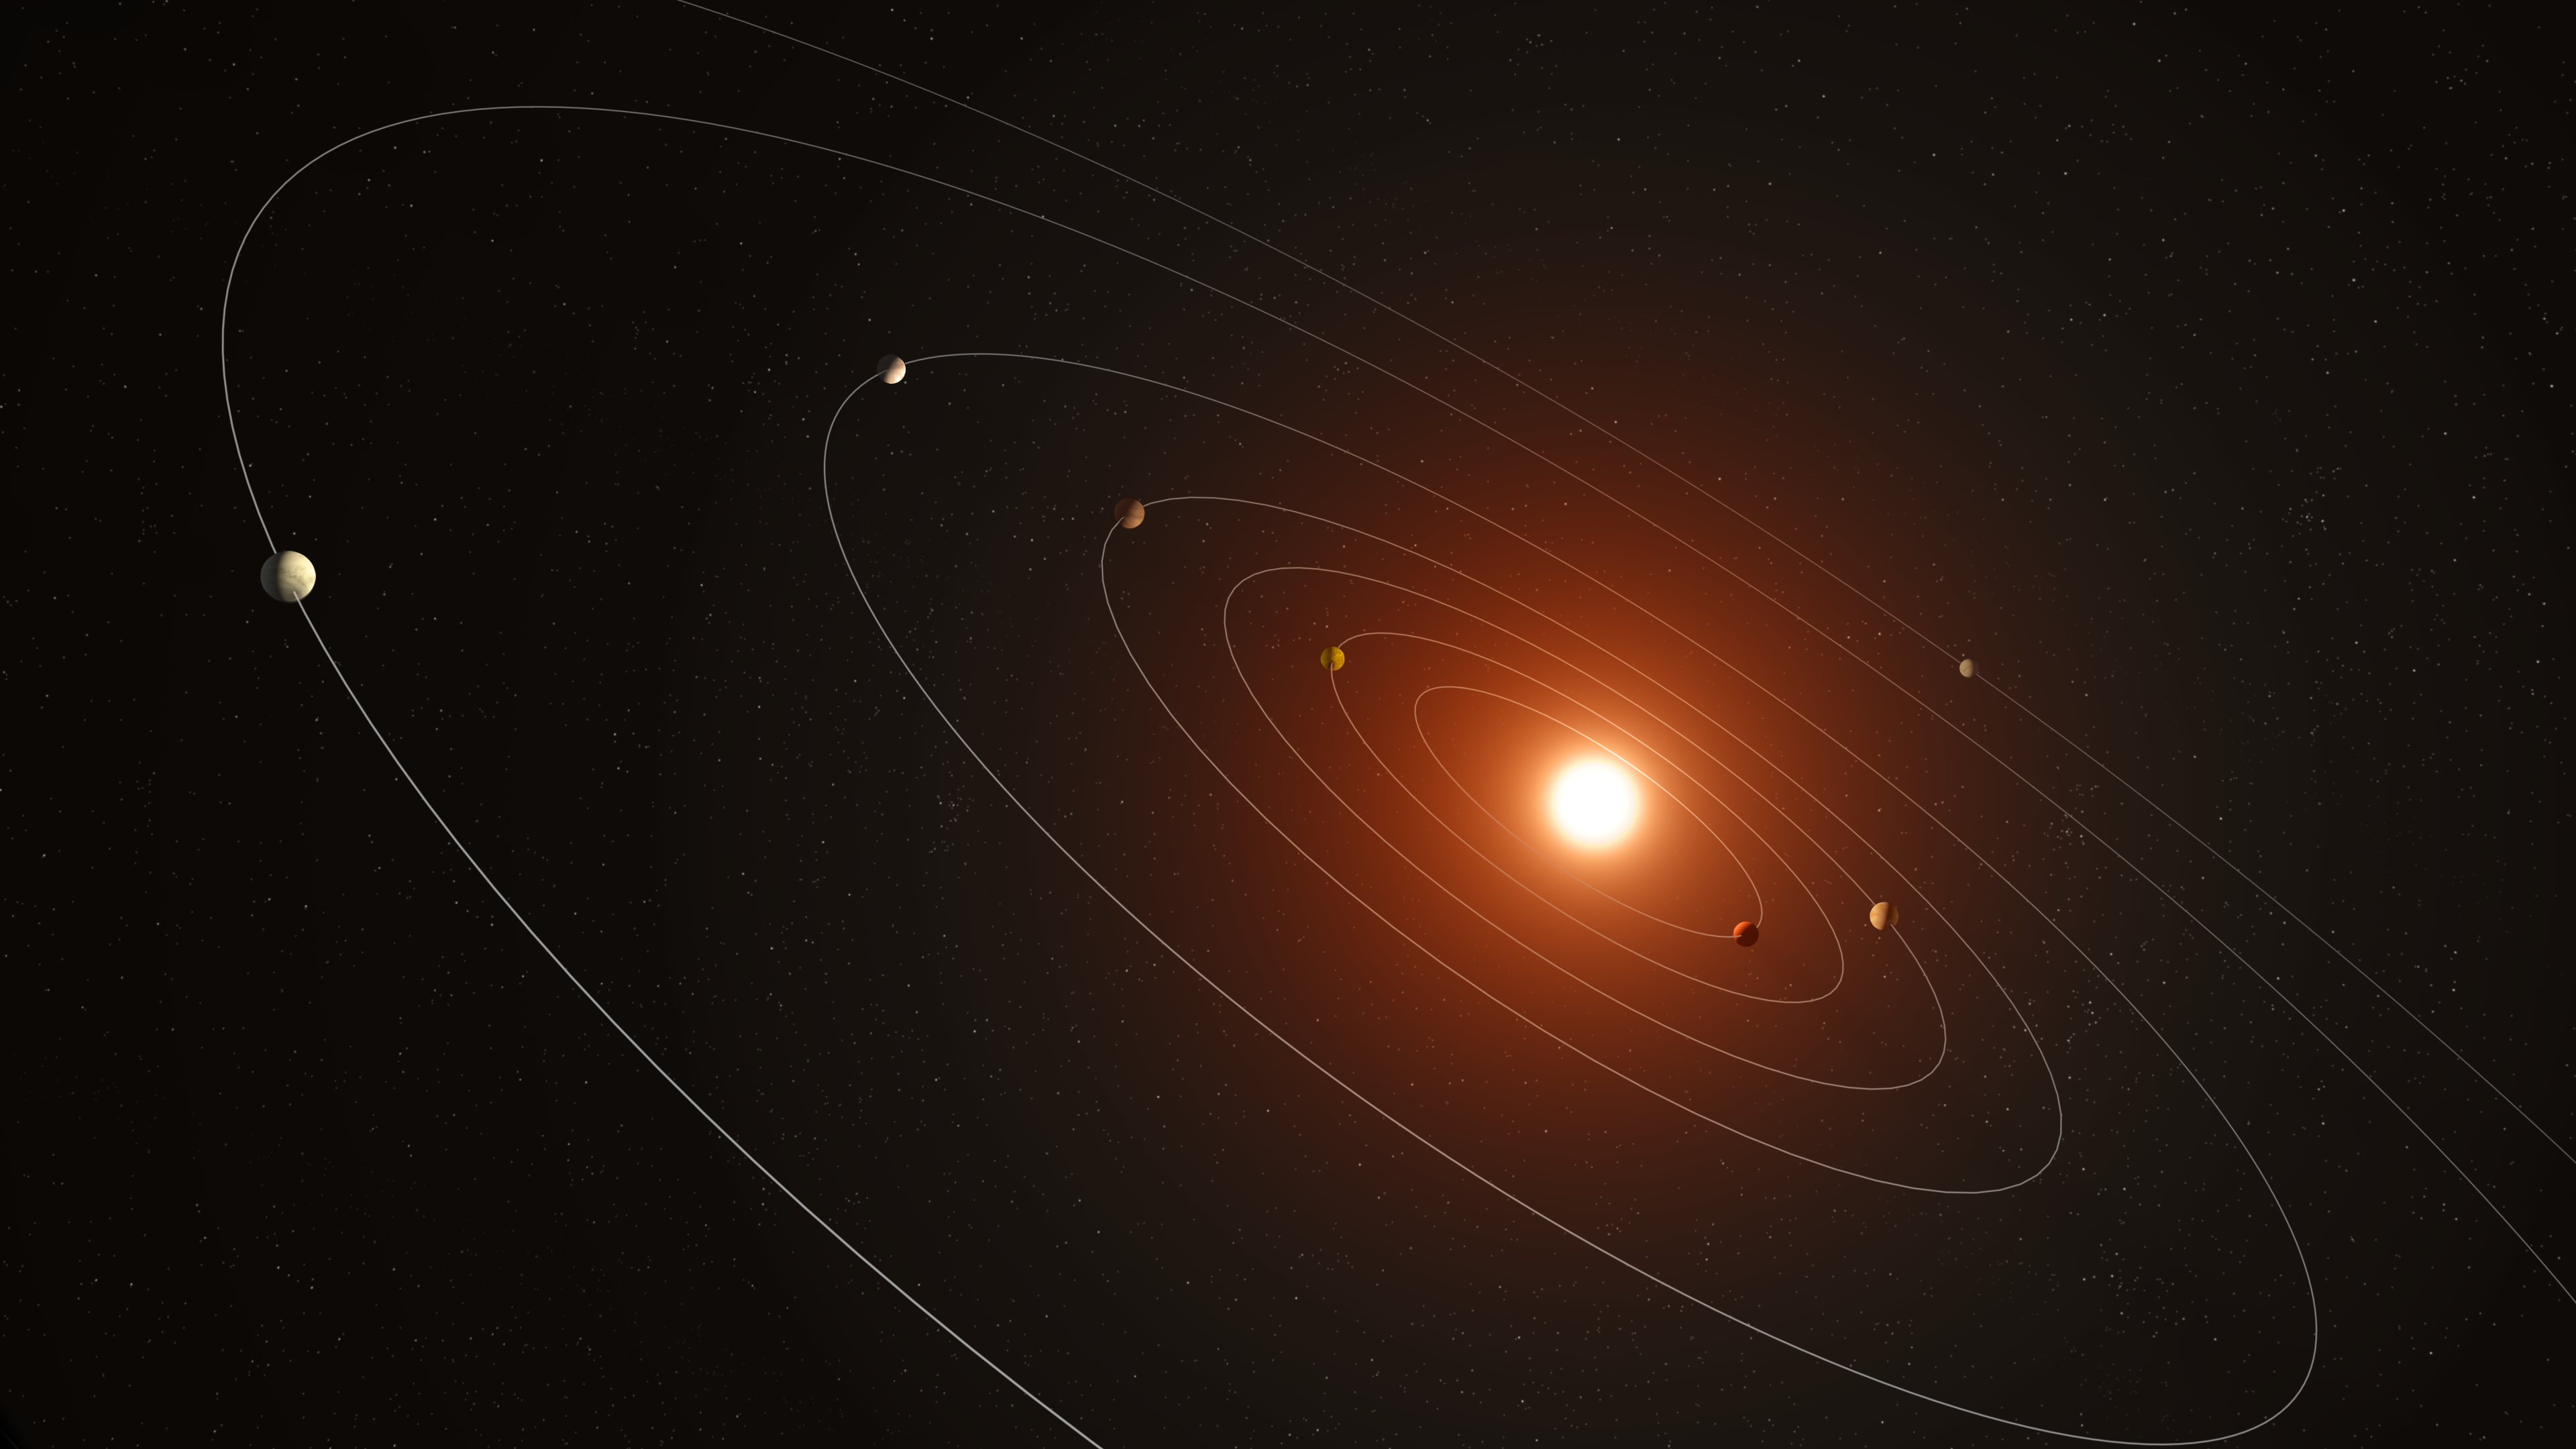 Scorching, Seven-Planet System Revealed by New Kepler Exoplanet List